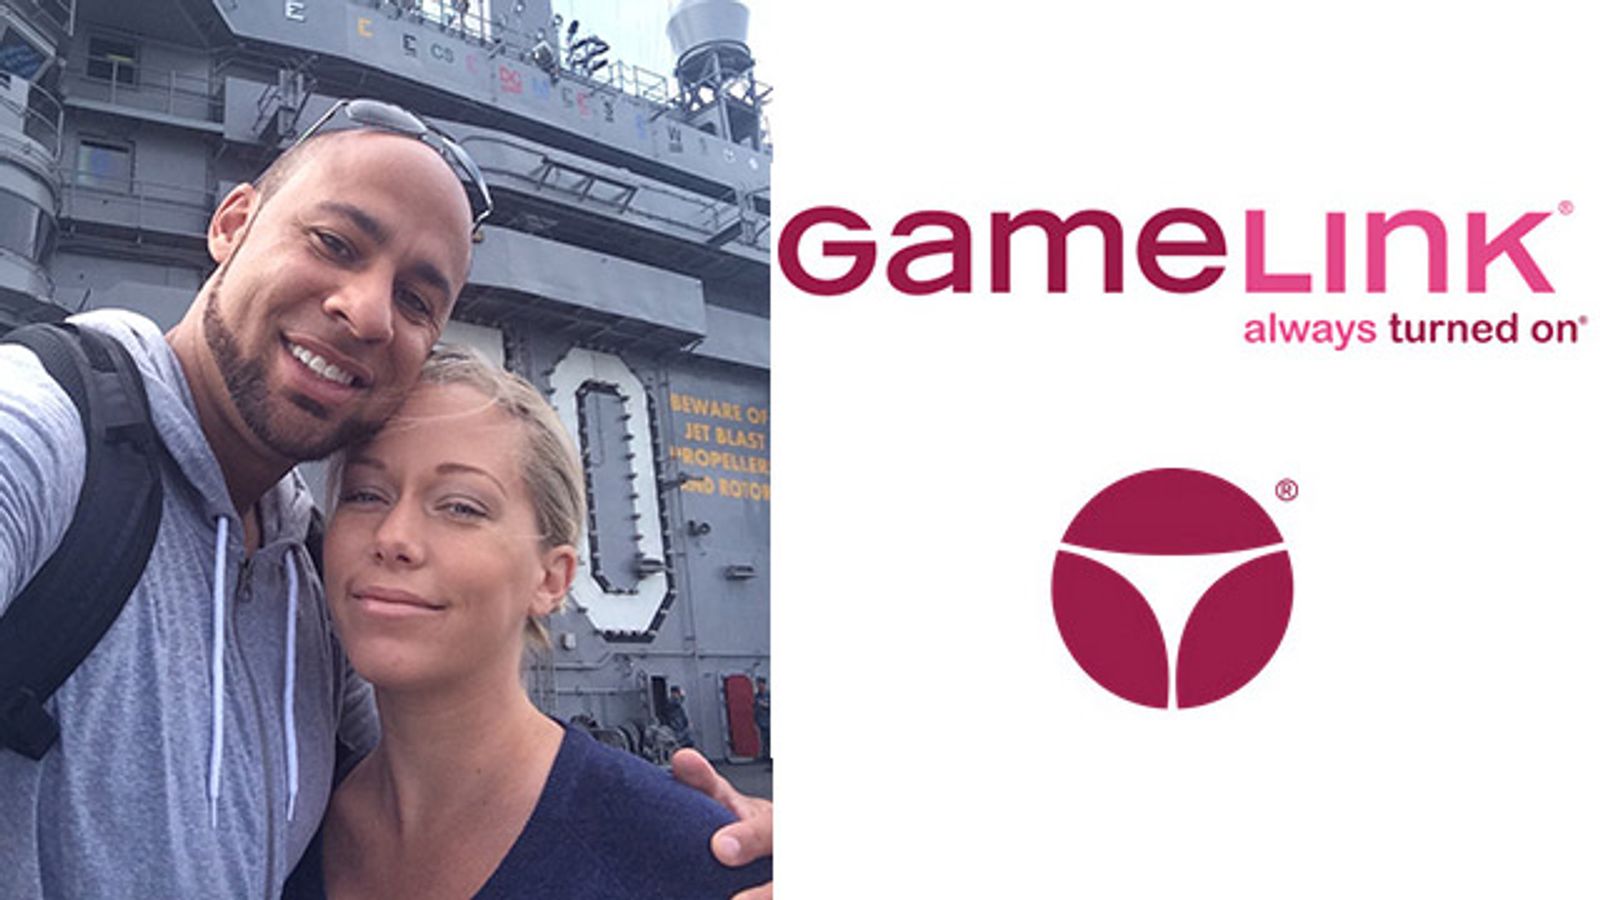 GameLink Offers Hank Baskett Free Access to Transsexual Porn